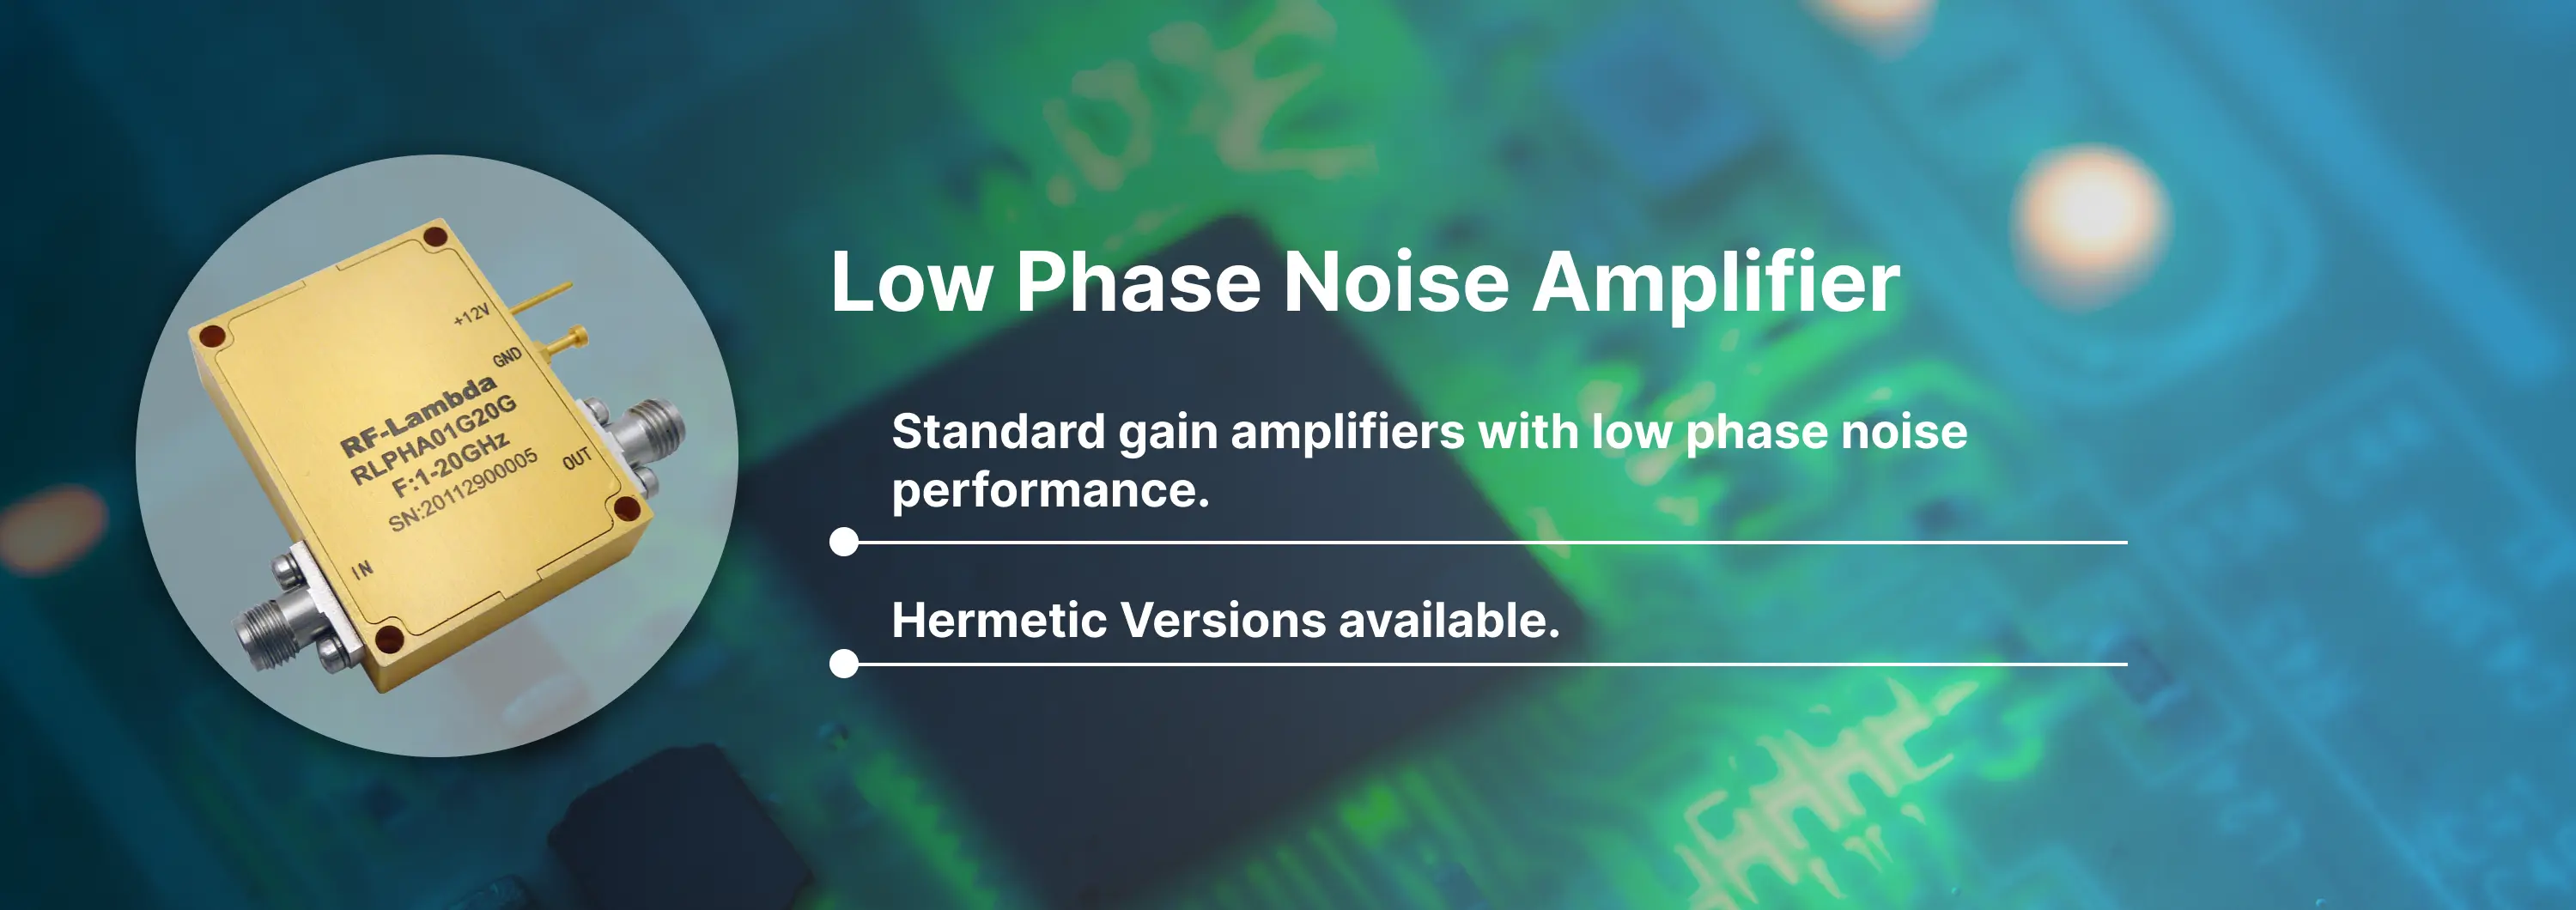 Low Phase Noise Amplifier Banner